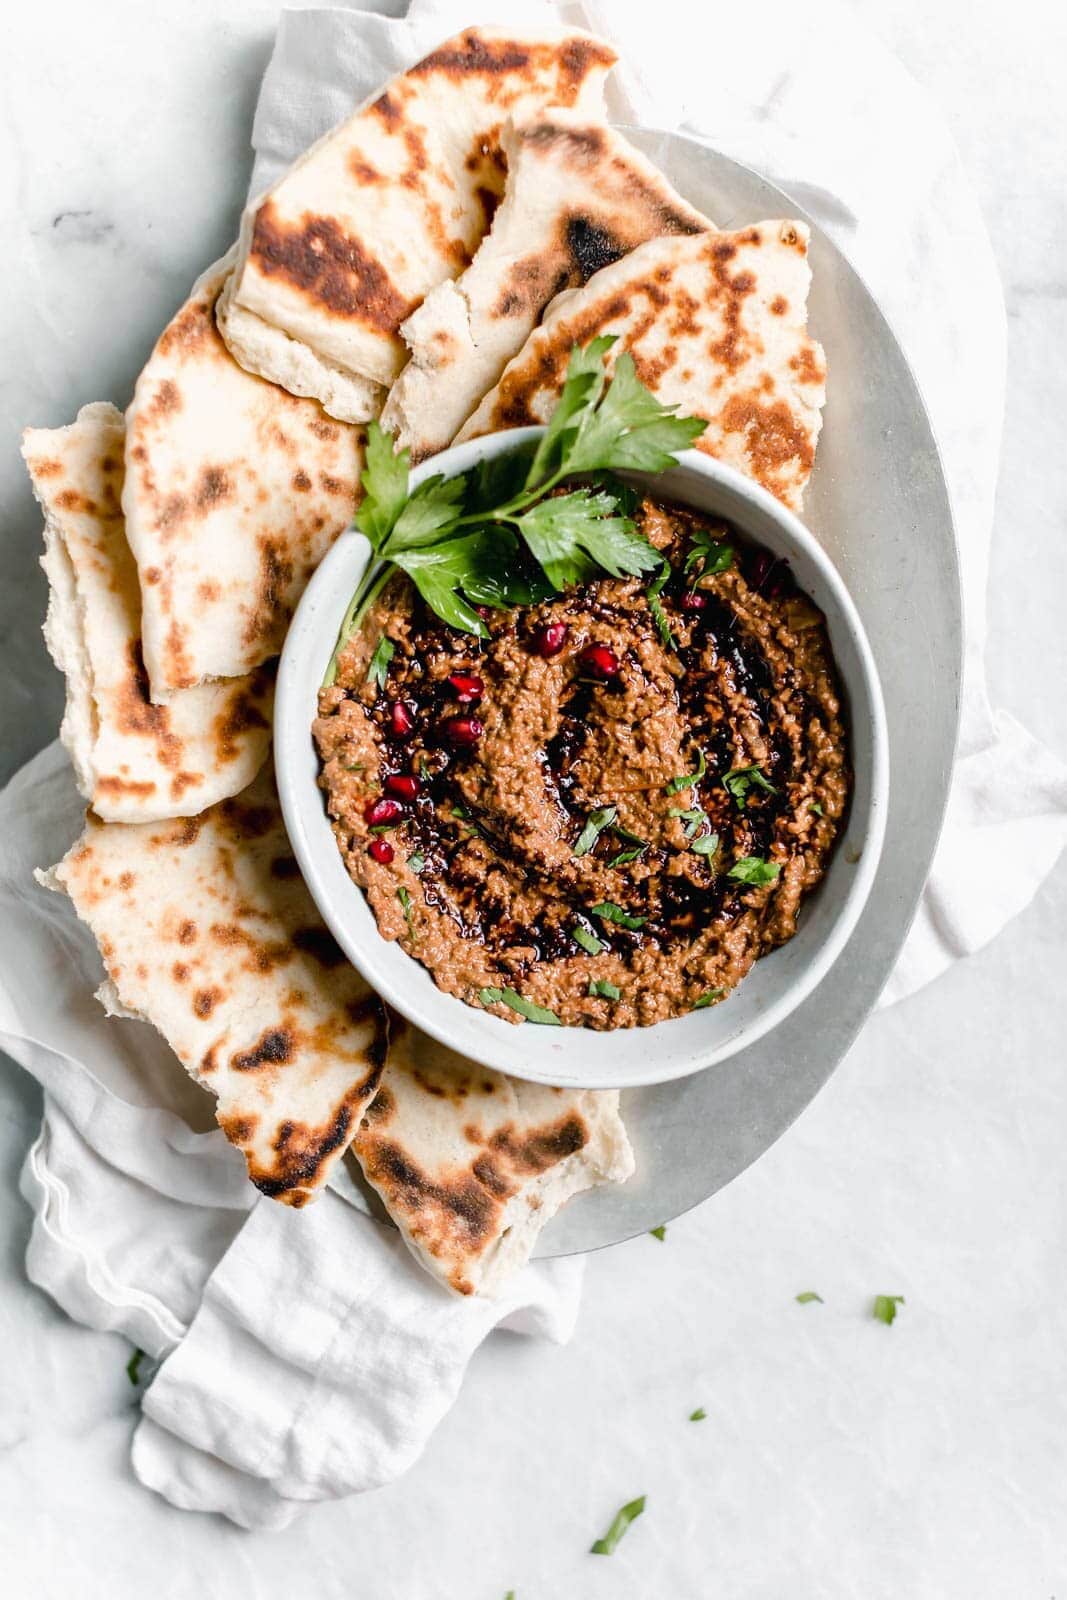 Muhammara aka the best dip you've never heard of. Made with roasted red peppers and walnuts, and sweetened with pomegranate molasses!